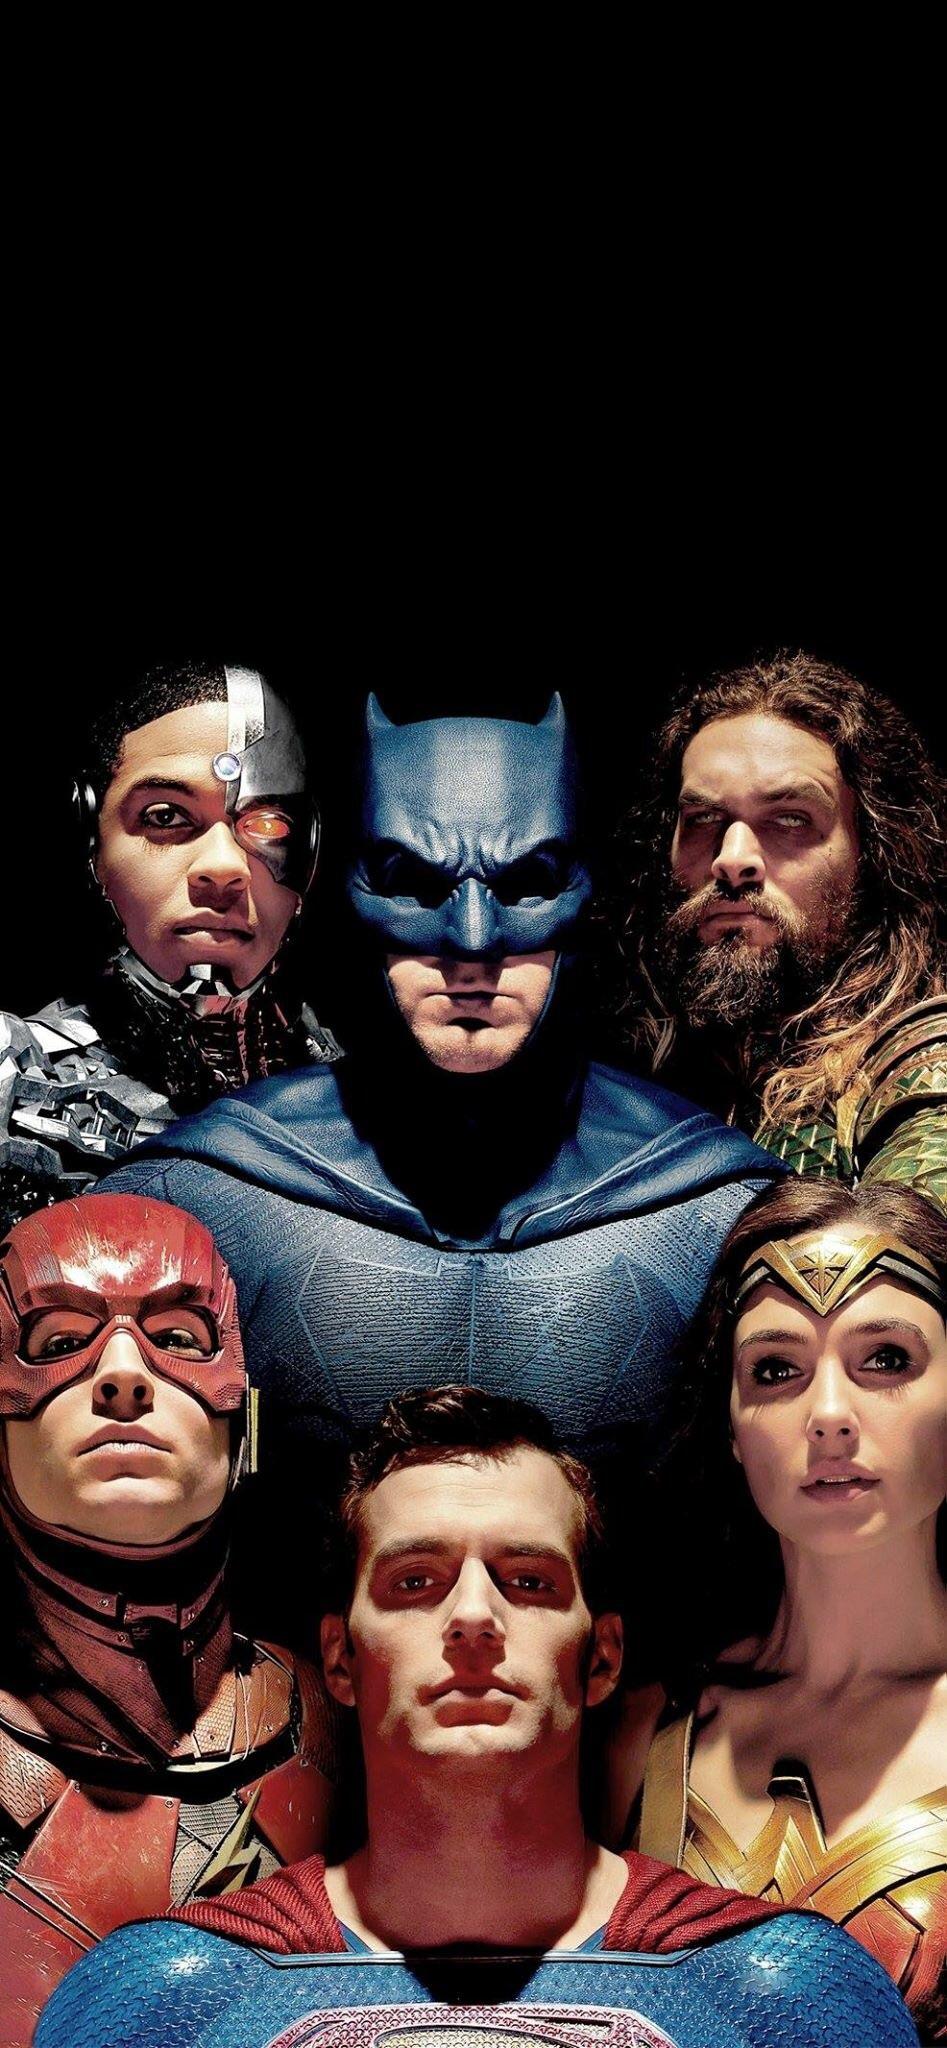 Justice League Iphone Wallpapers